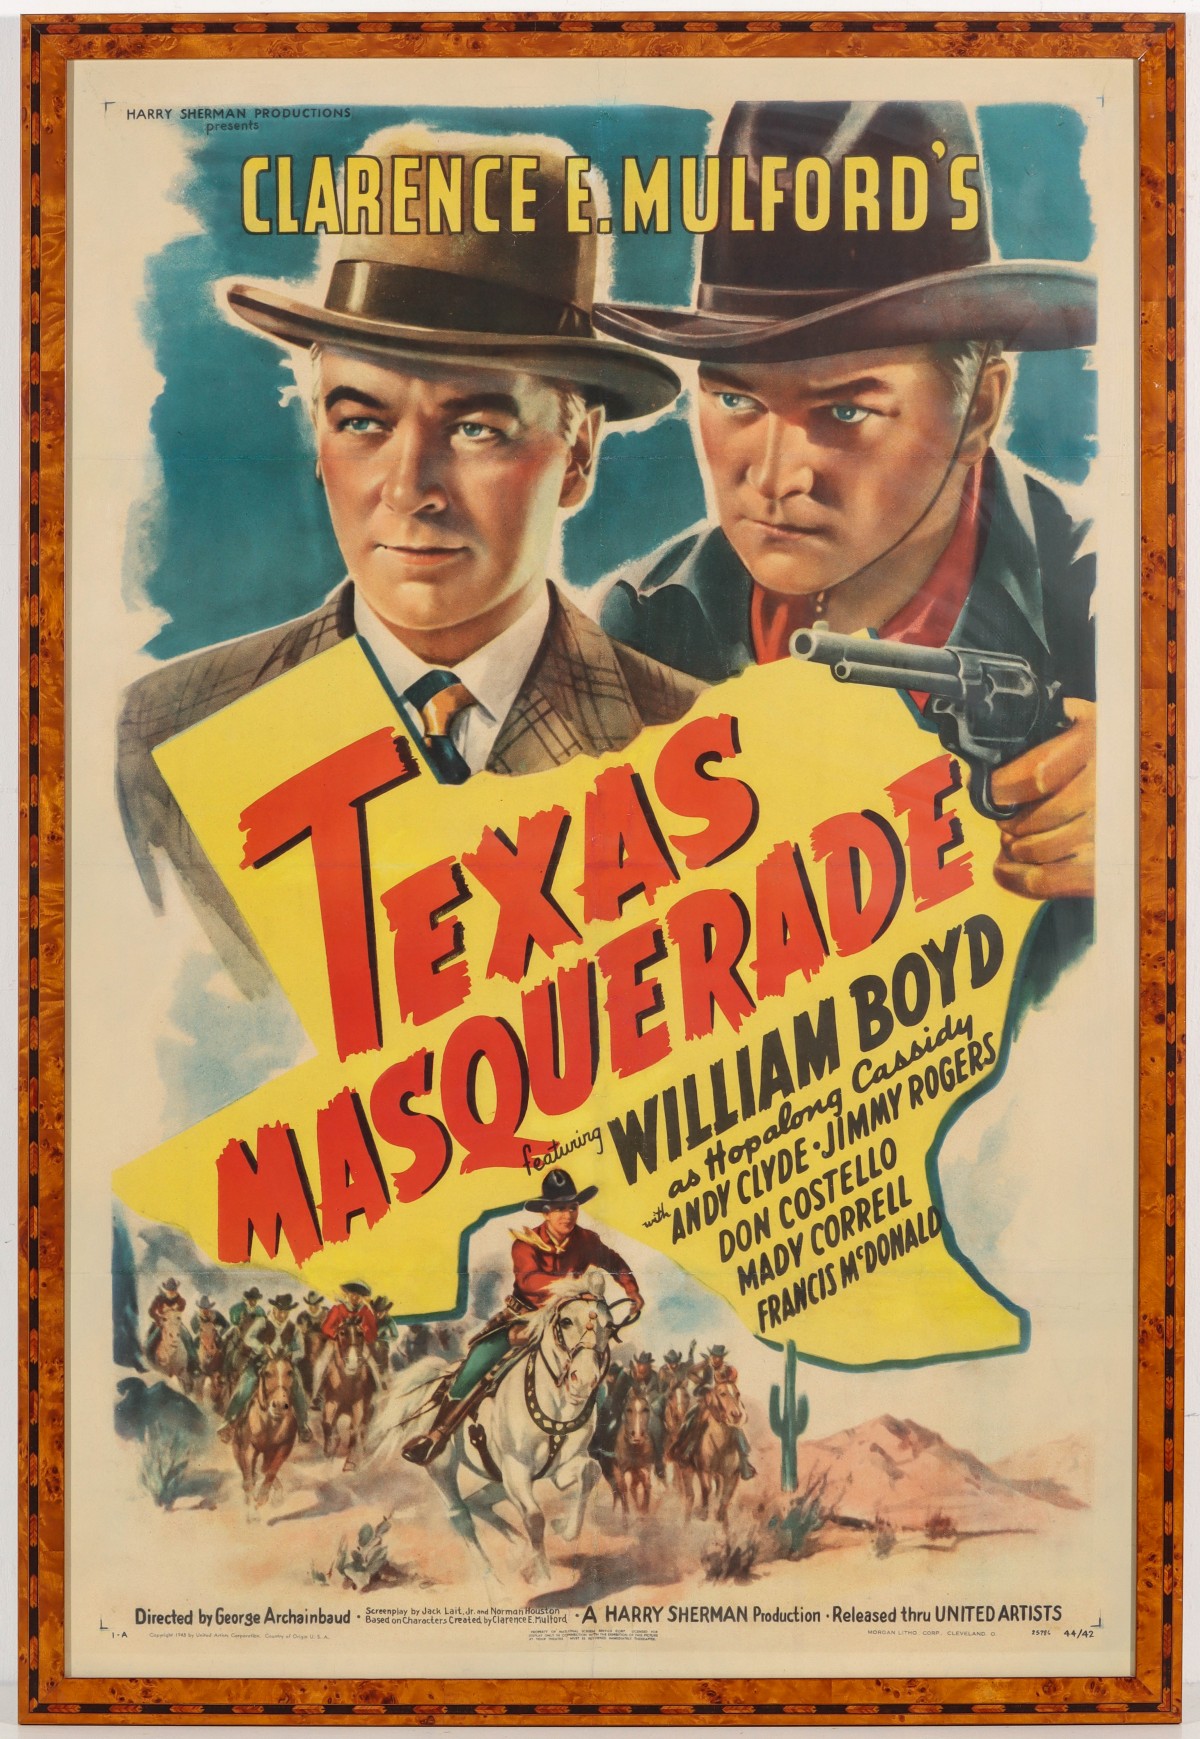 A 1943 MOVIE POSTER FOR WILLIAM BOYD AS HOALONG CASSIDY